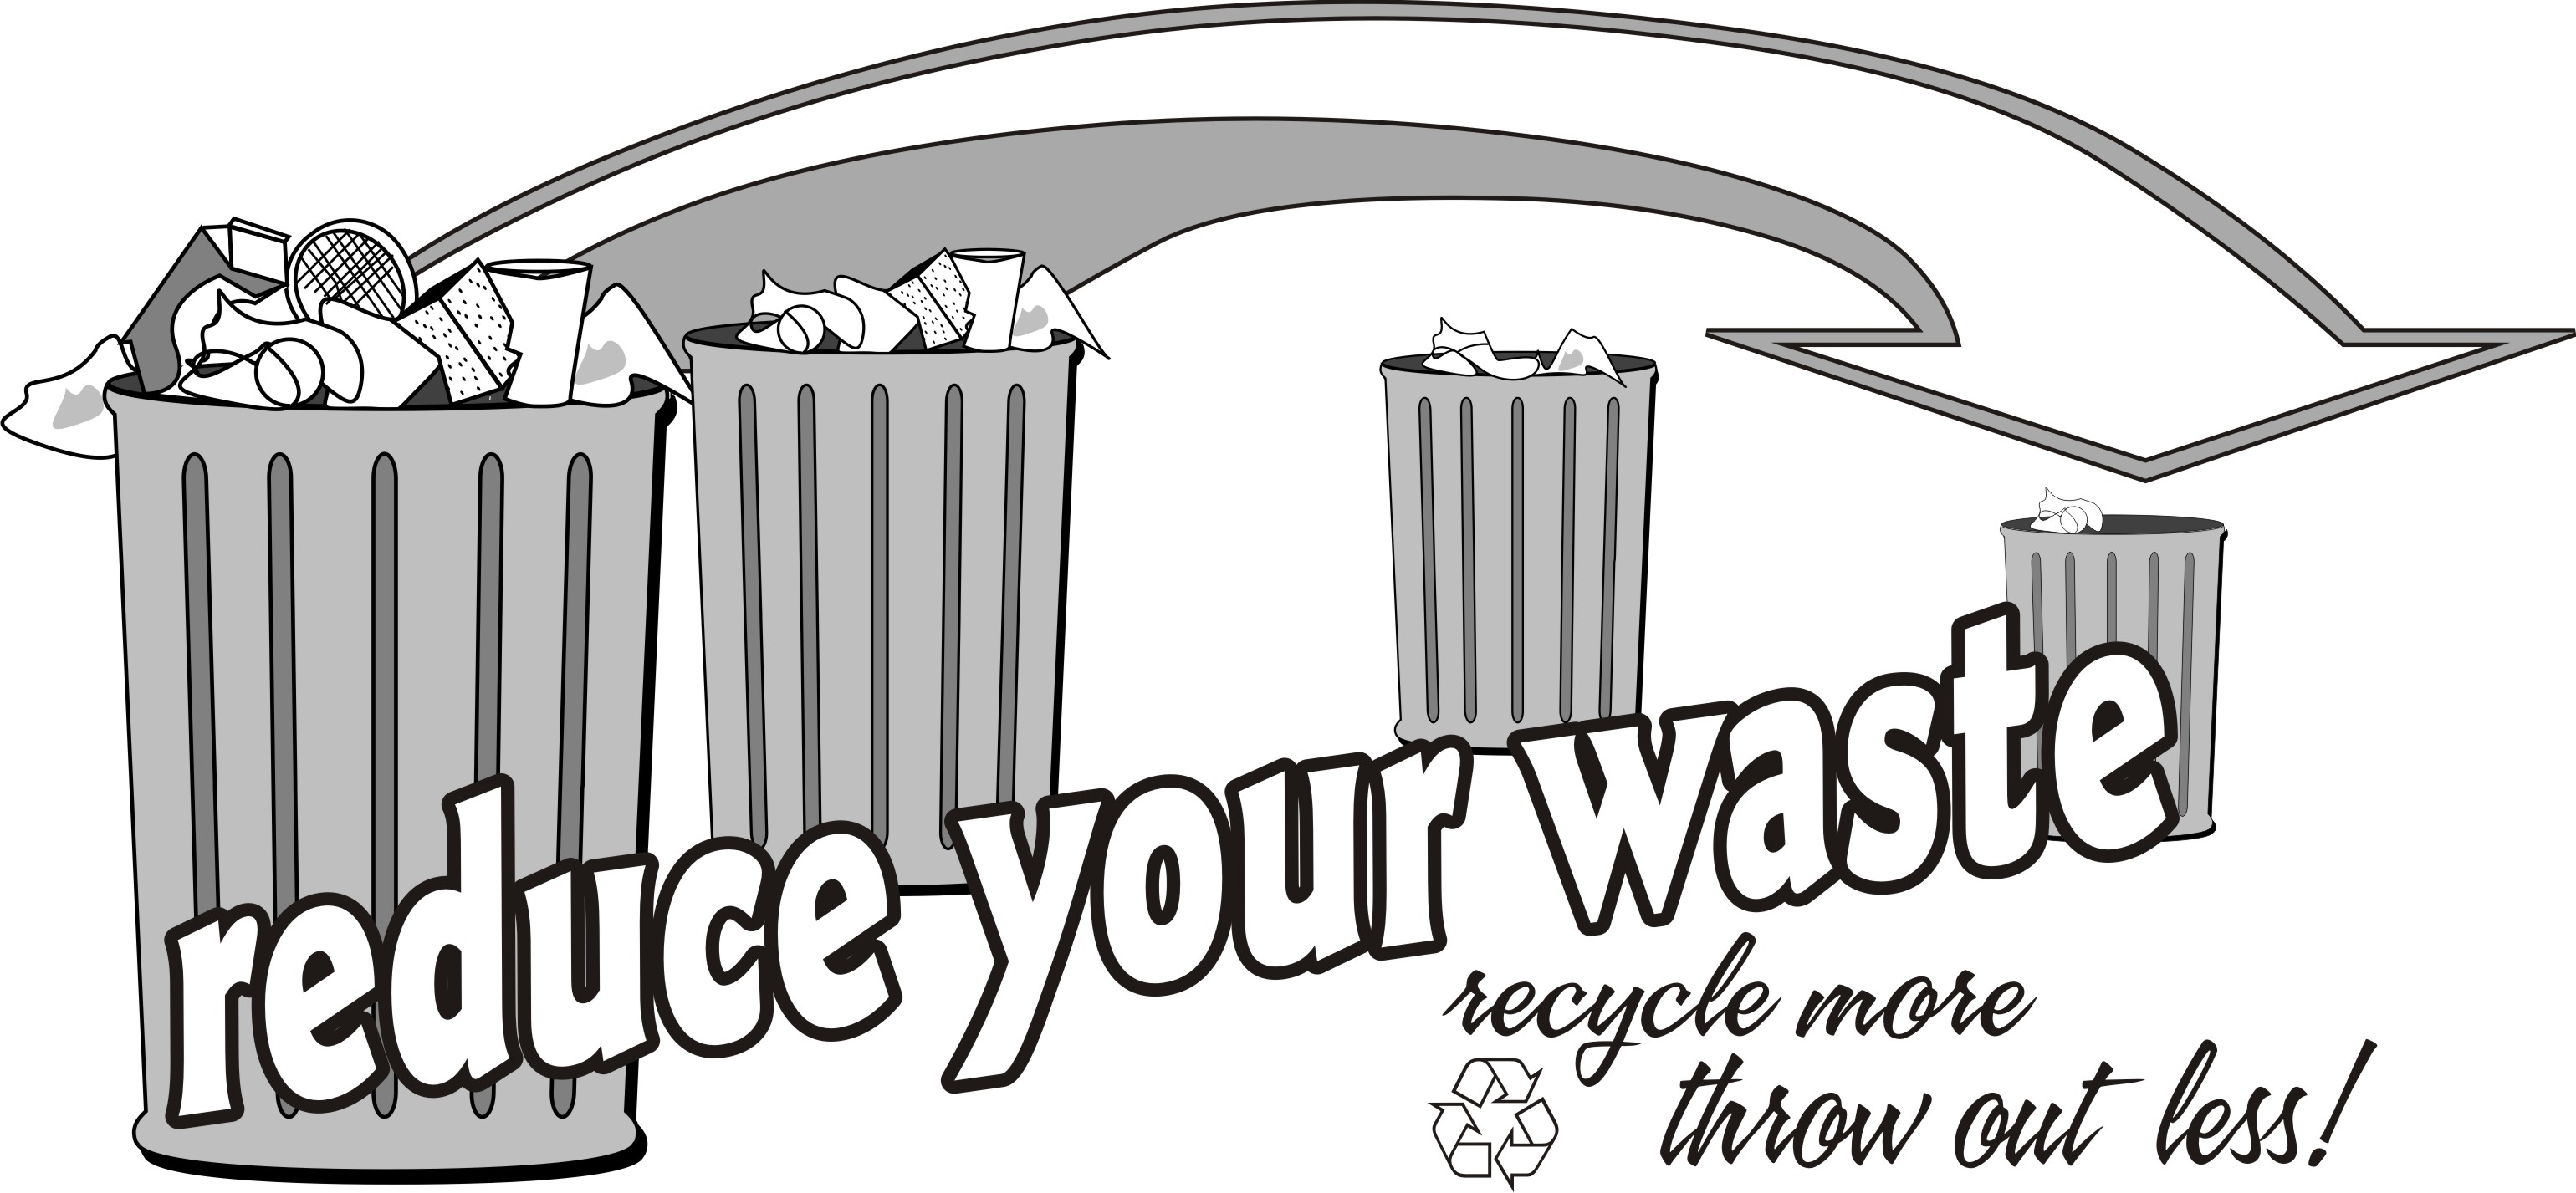 Reduce картинки. Reduce waste. Reduce reuse recycle. Reduce your waste. Reduce mean